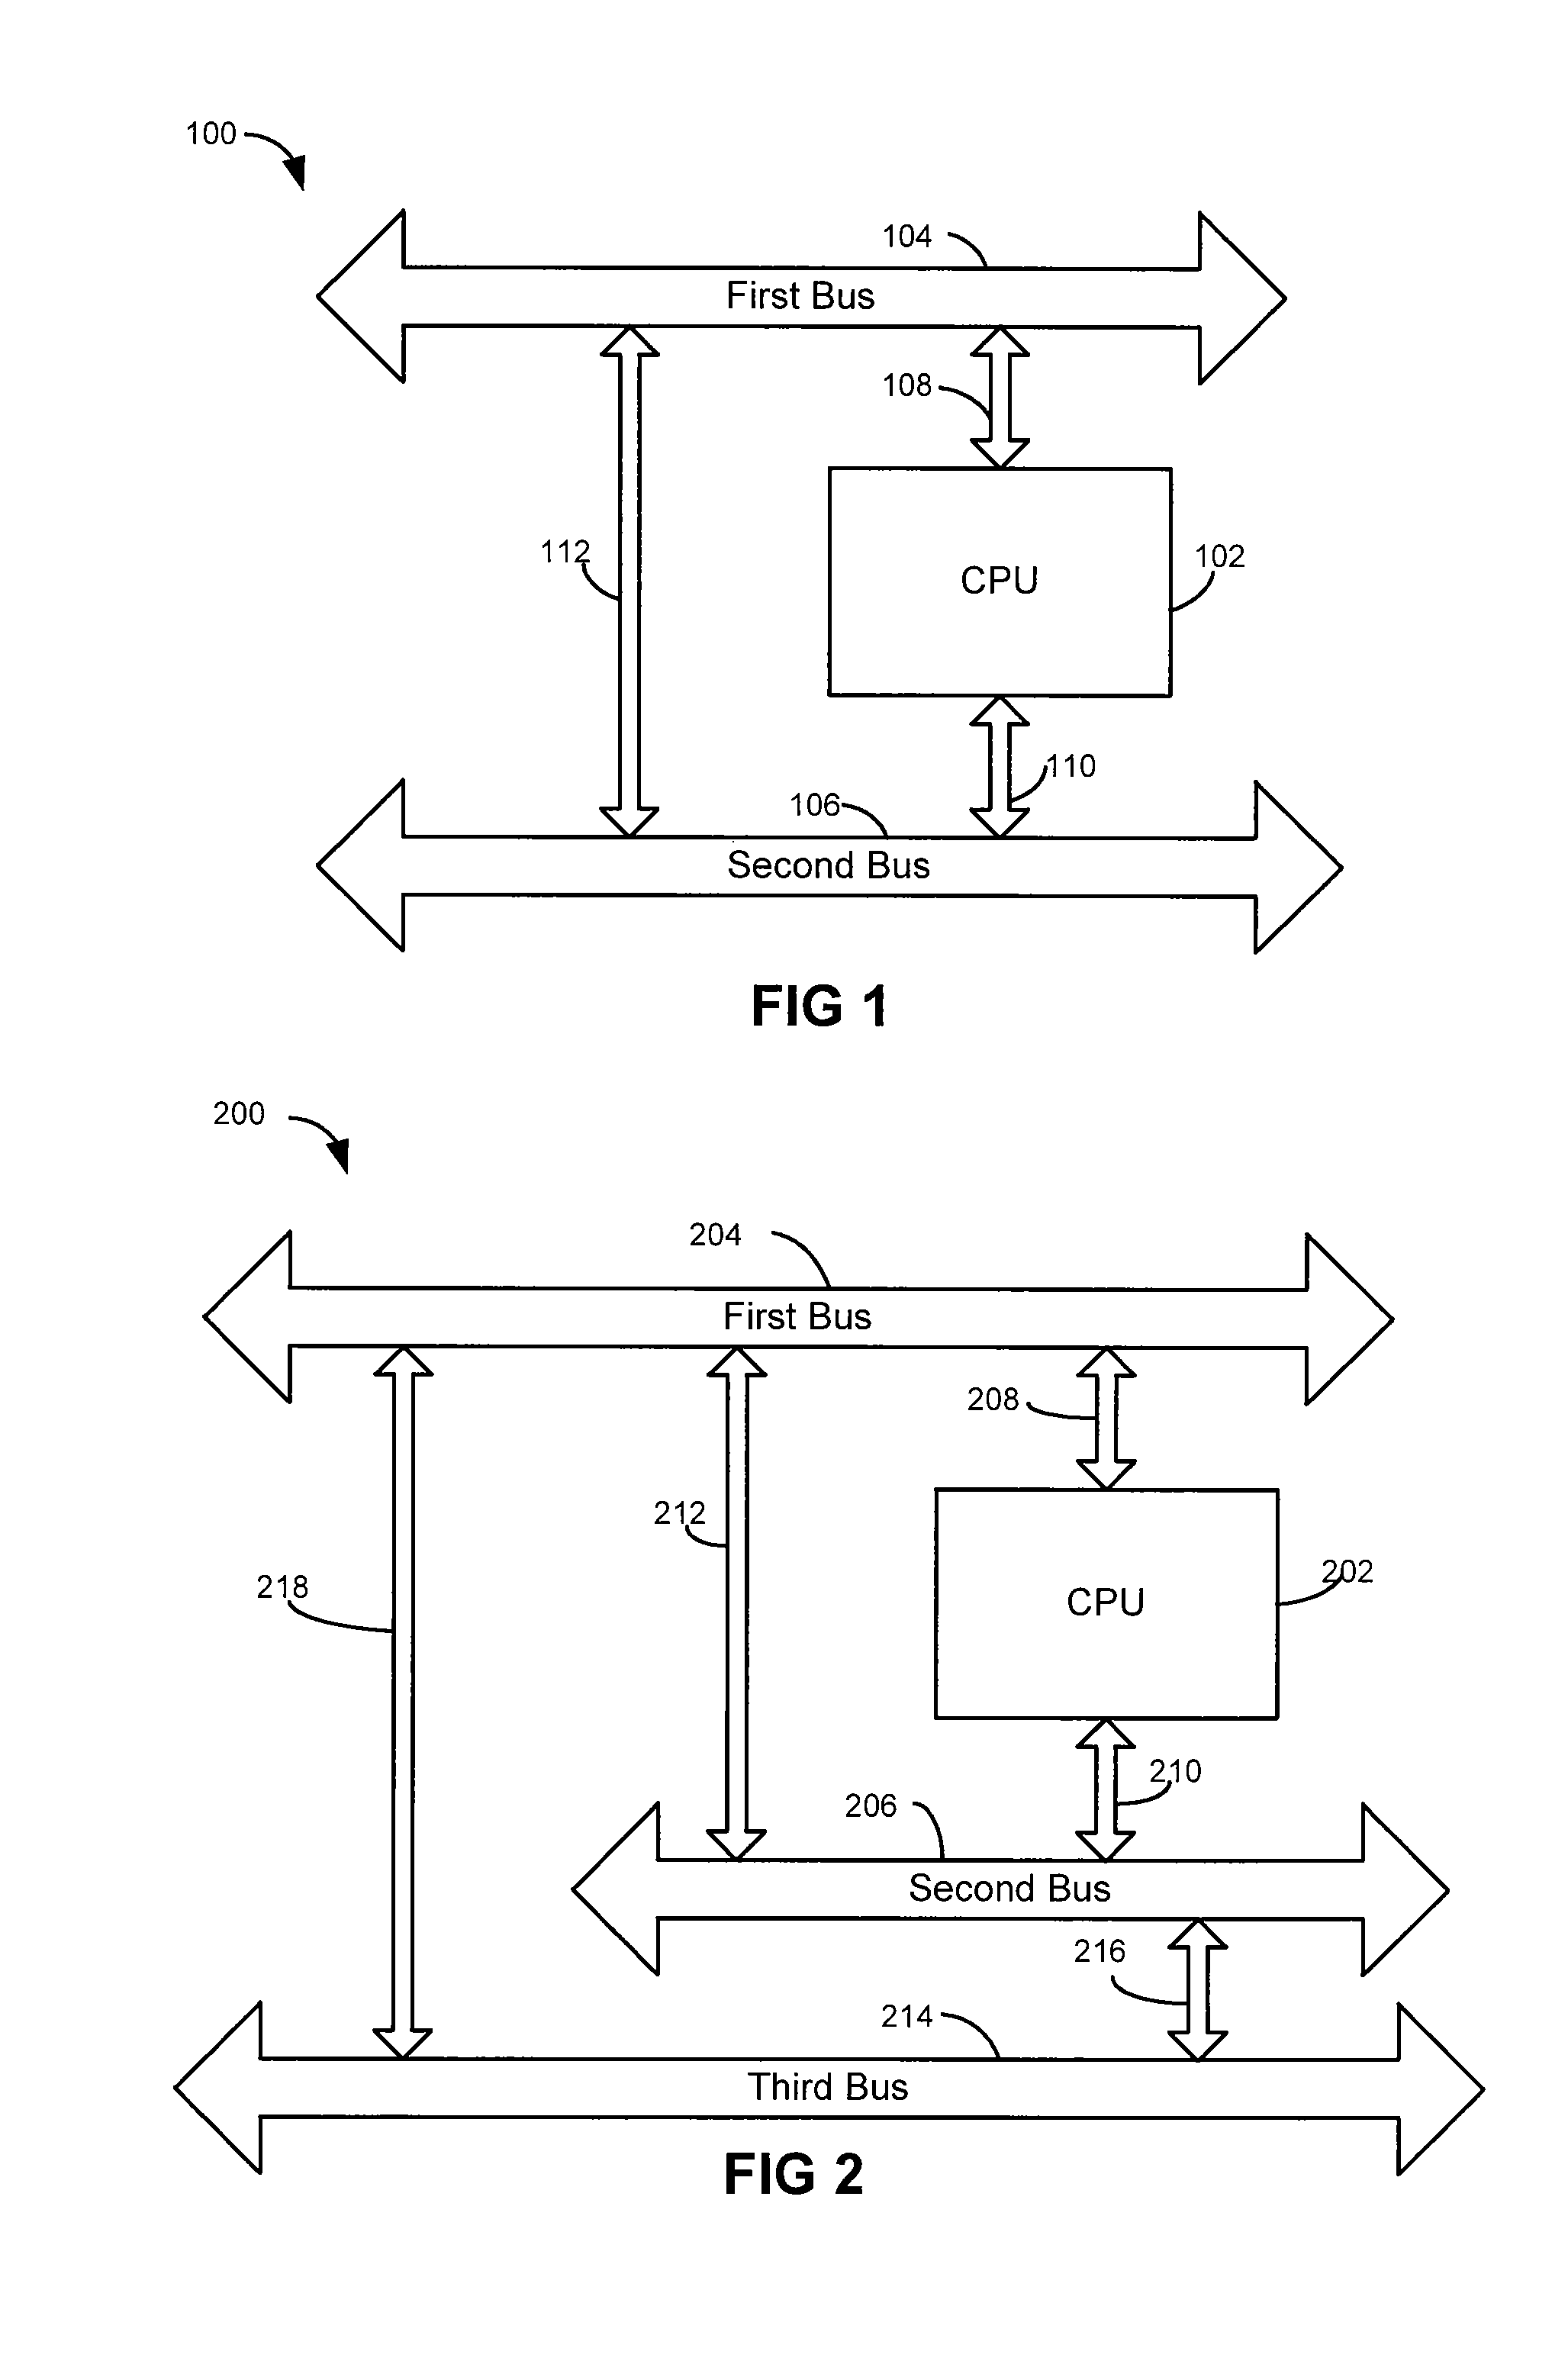 Multi-port processor architecture with bidirectional interfaces between busses